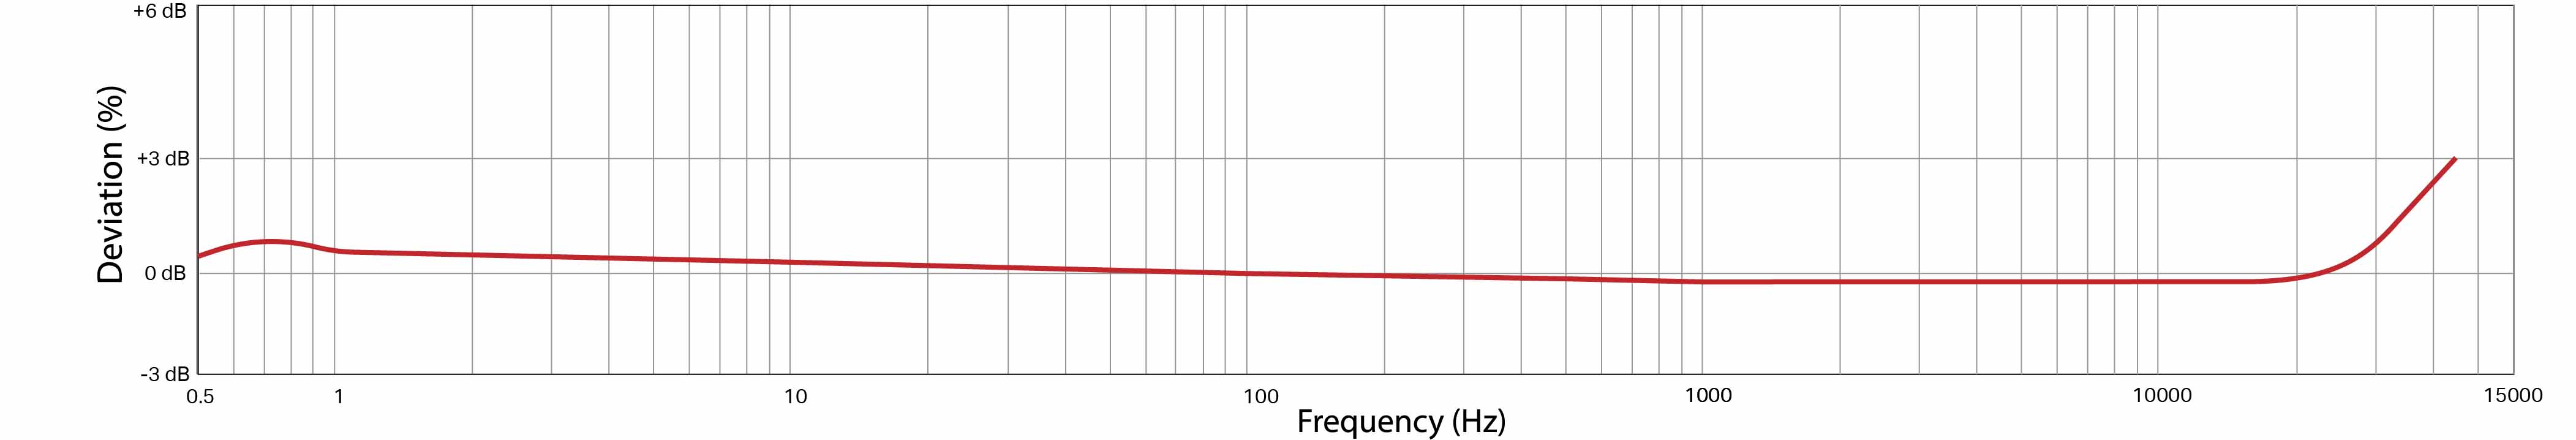 A line graph showing the frequency resopnse of a CTC AC102-M12A condition monitoring sensor.